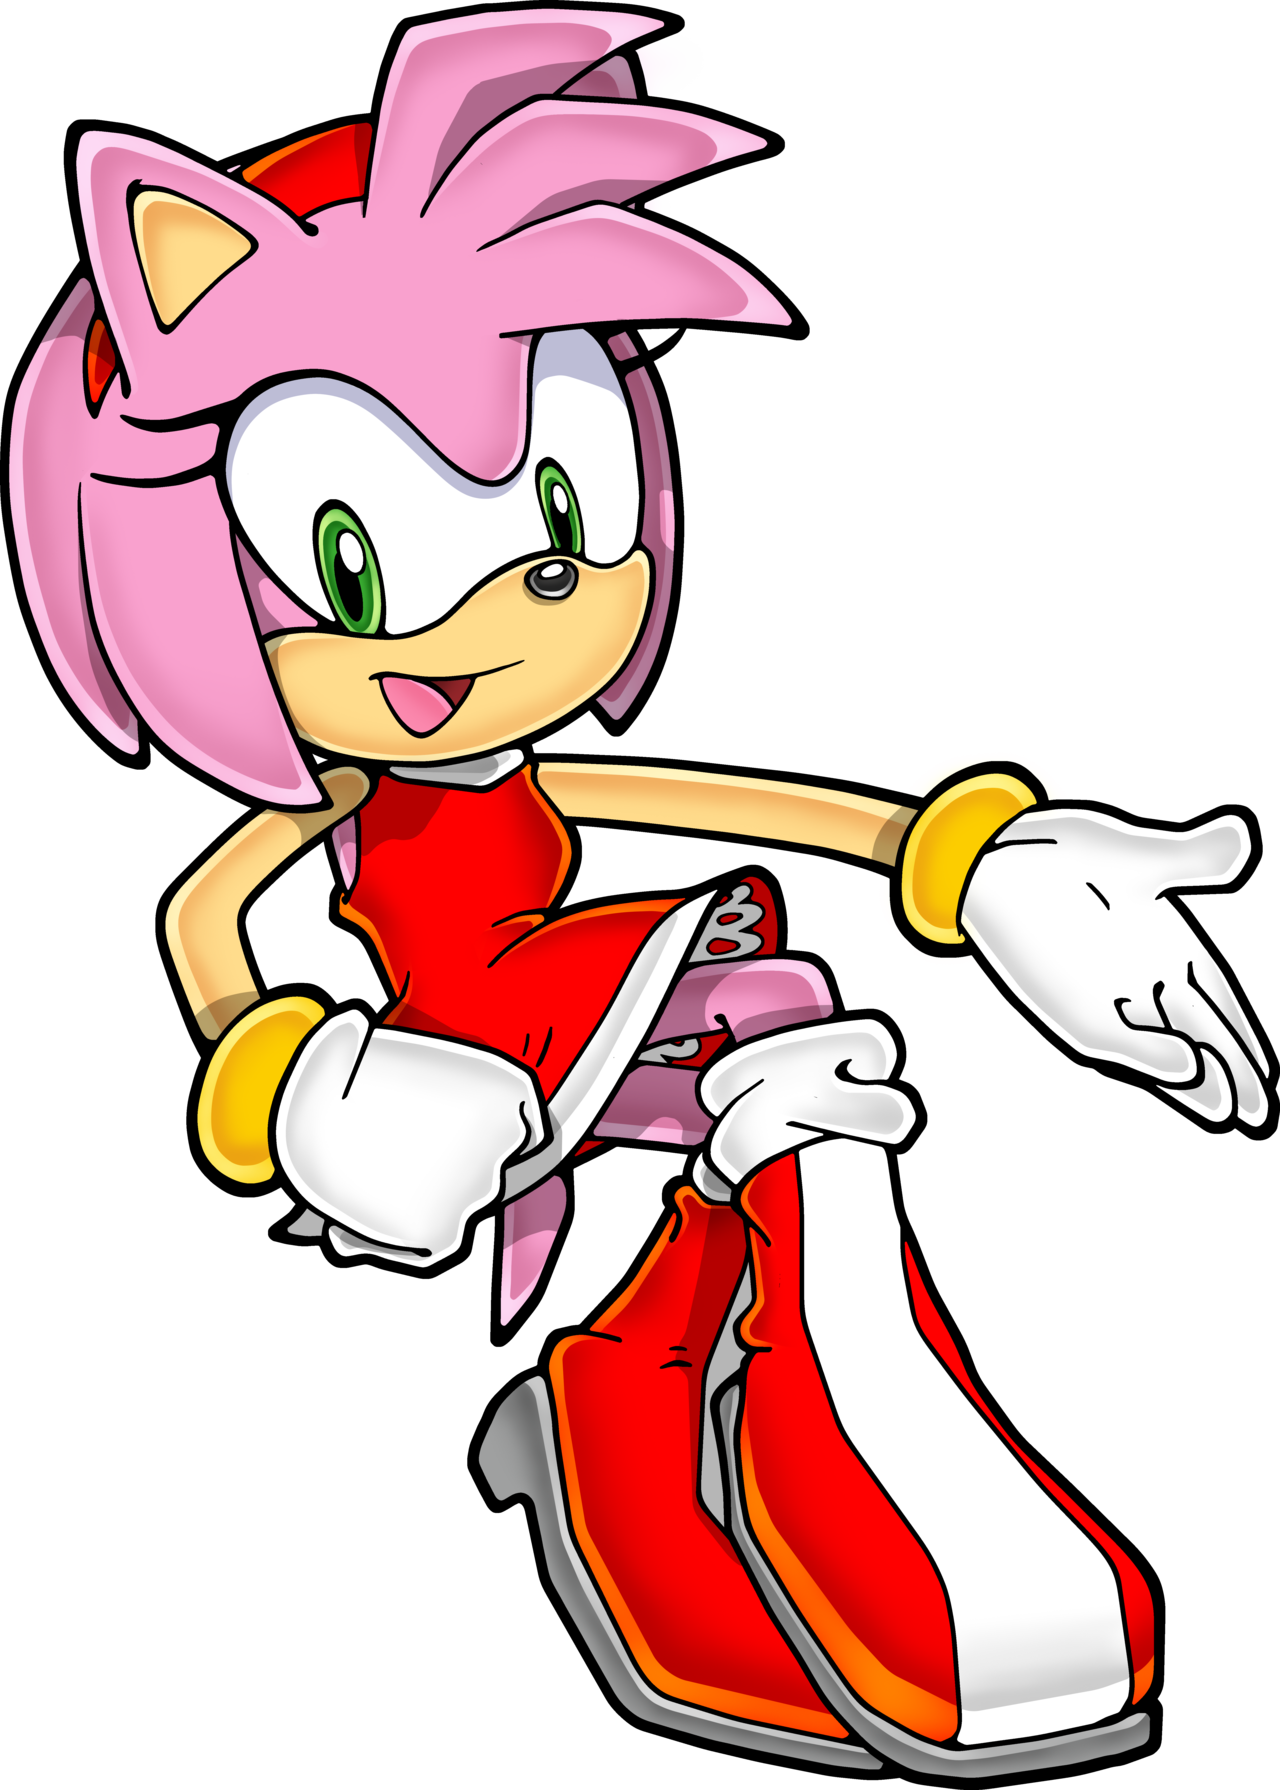 Amy Rose 2013 By Hypo-thermic - Amy Rose Official Art (1280x1790)